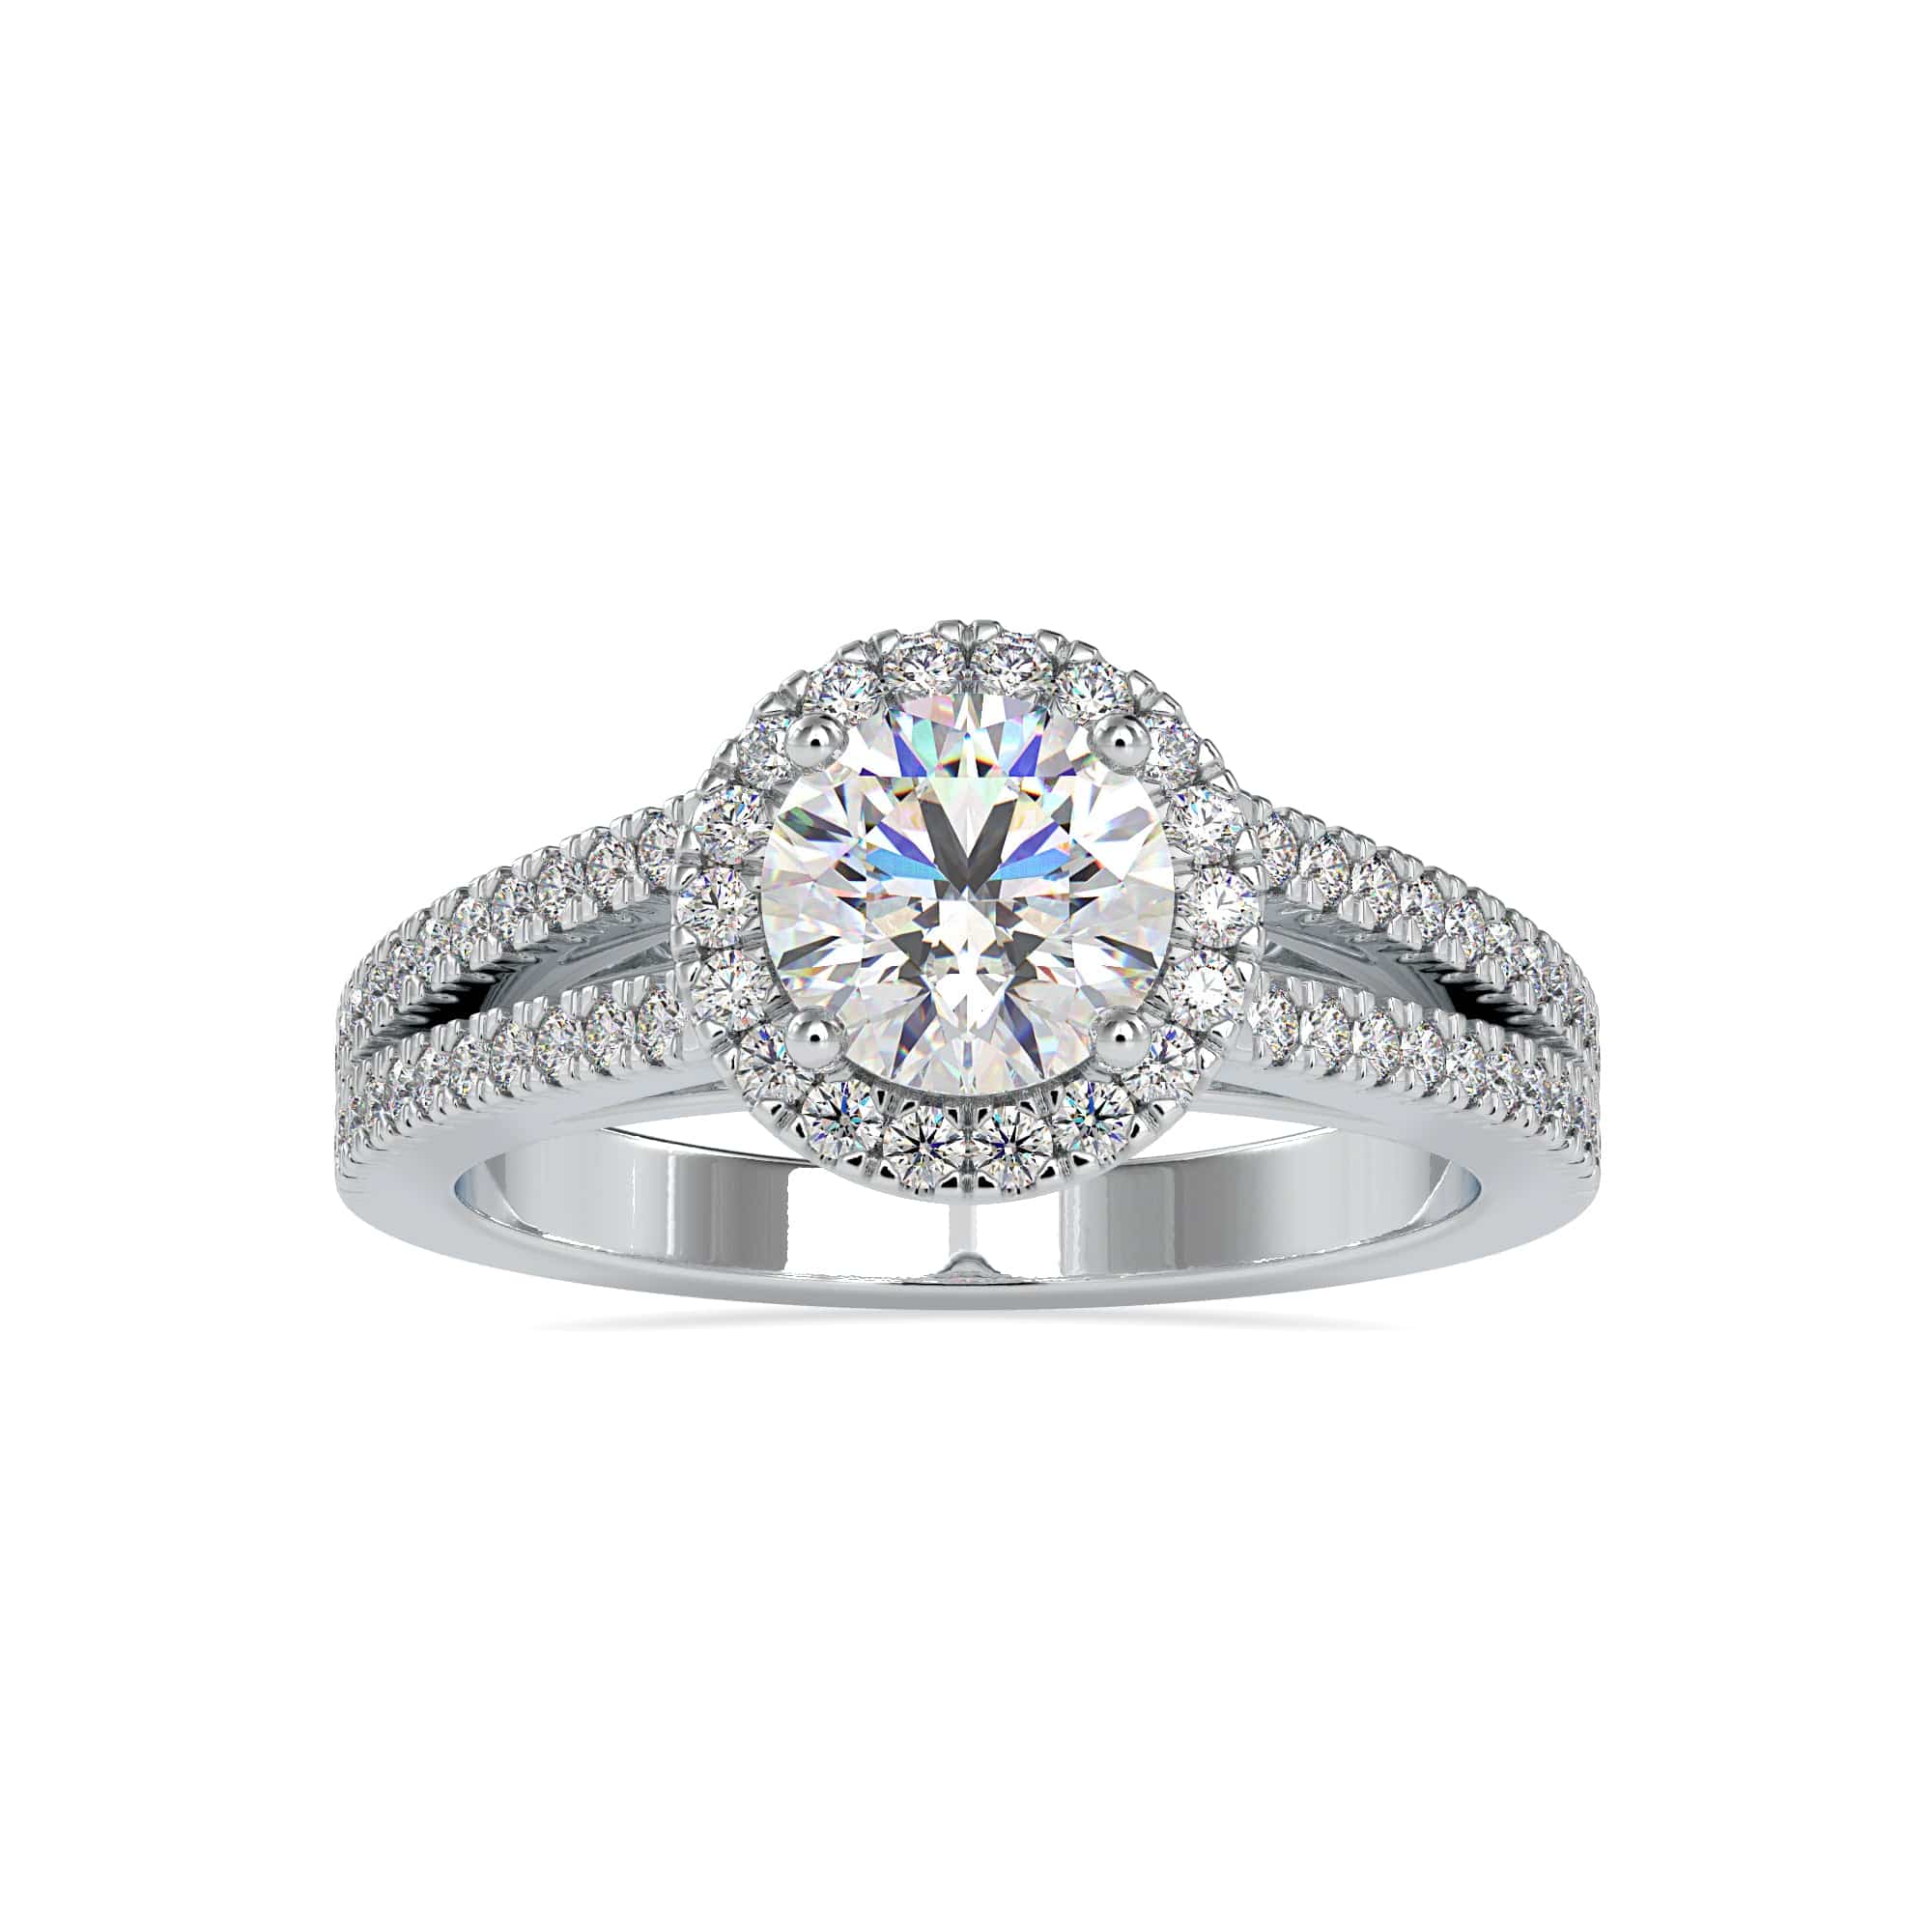 How much should a real diamond ring cost? - Ritani - Quora